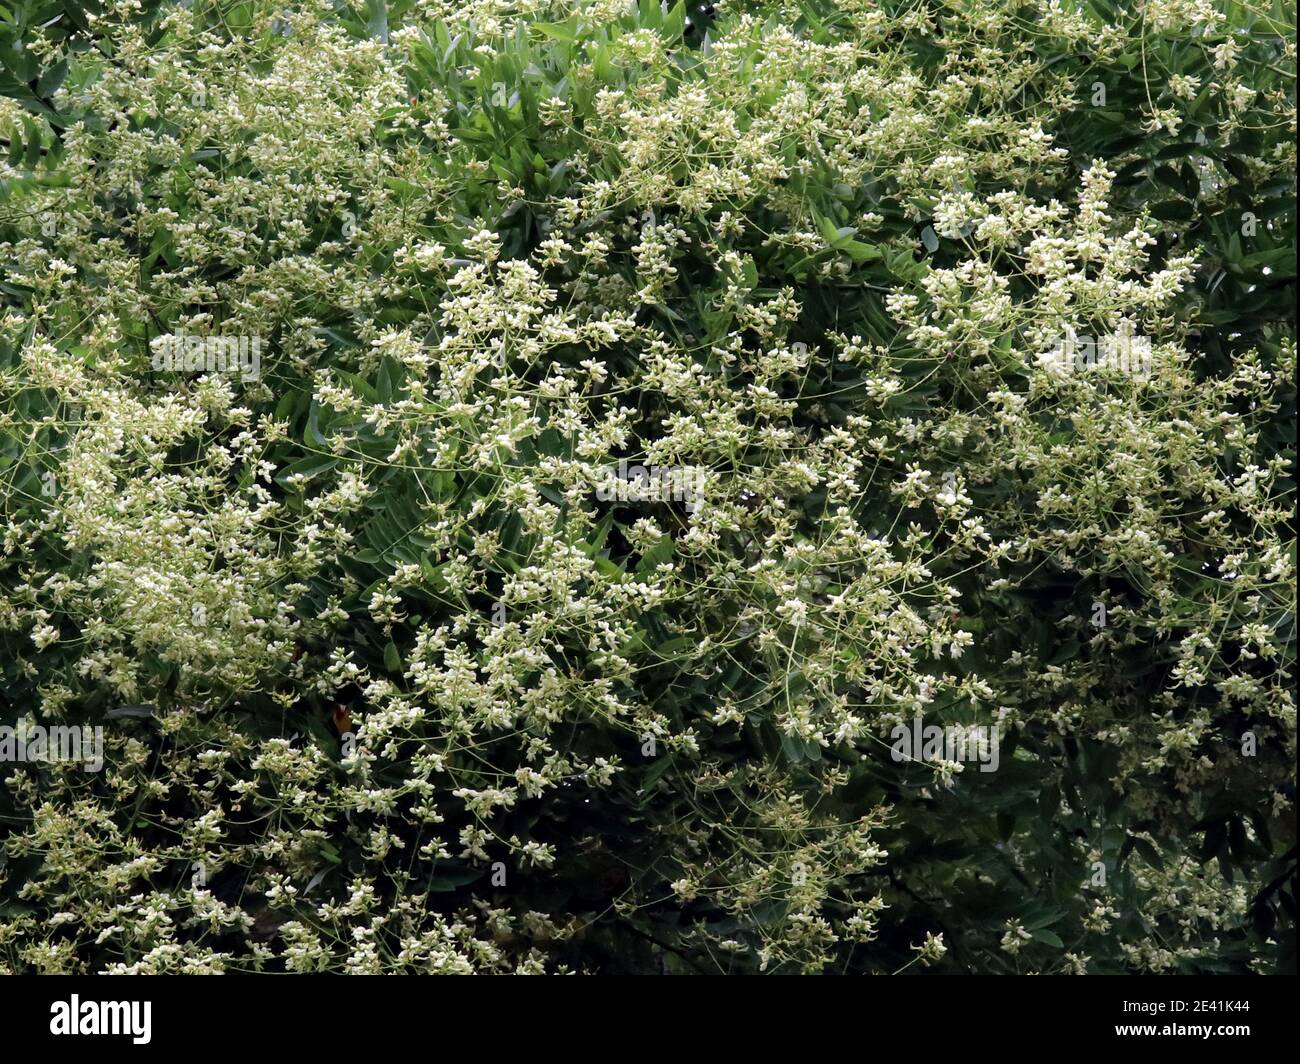 Japanese pagoda tree (Styphnolobium japonicum, Sophora japonica), blooming branches Stock Photo